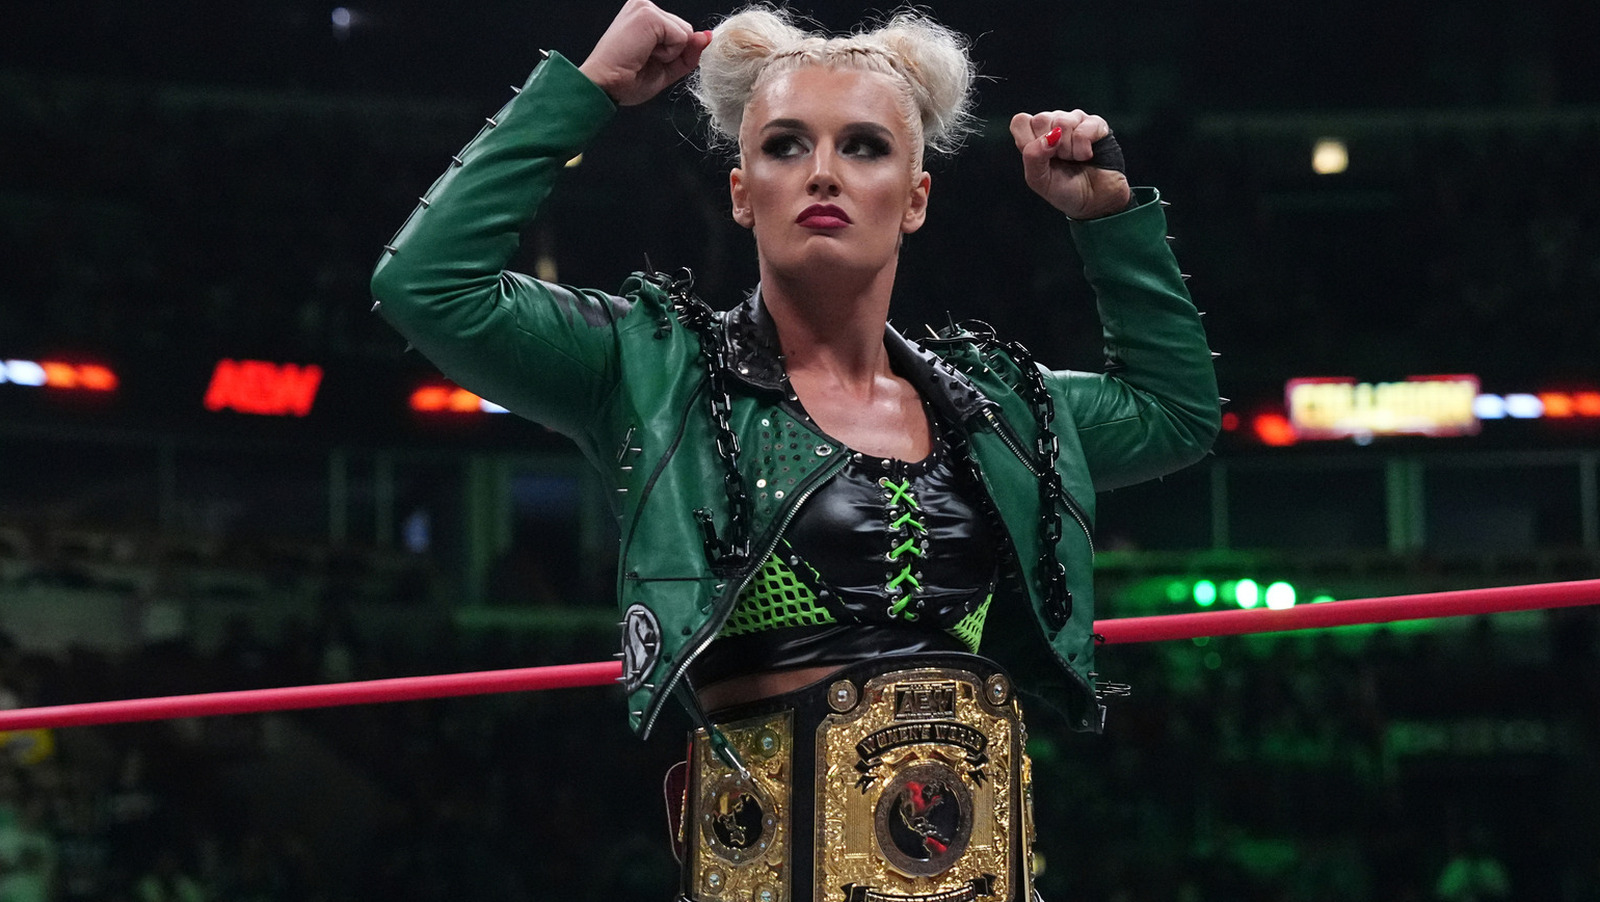 Toni Storm Survives Taya Valkyrie, Retains AEW Women's Title On Battle Of The Belts